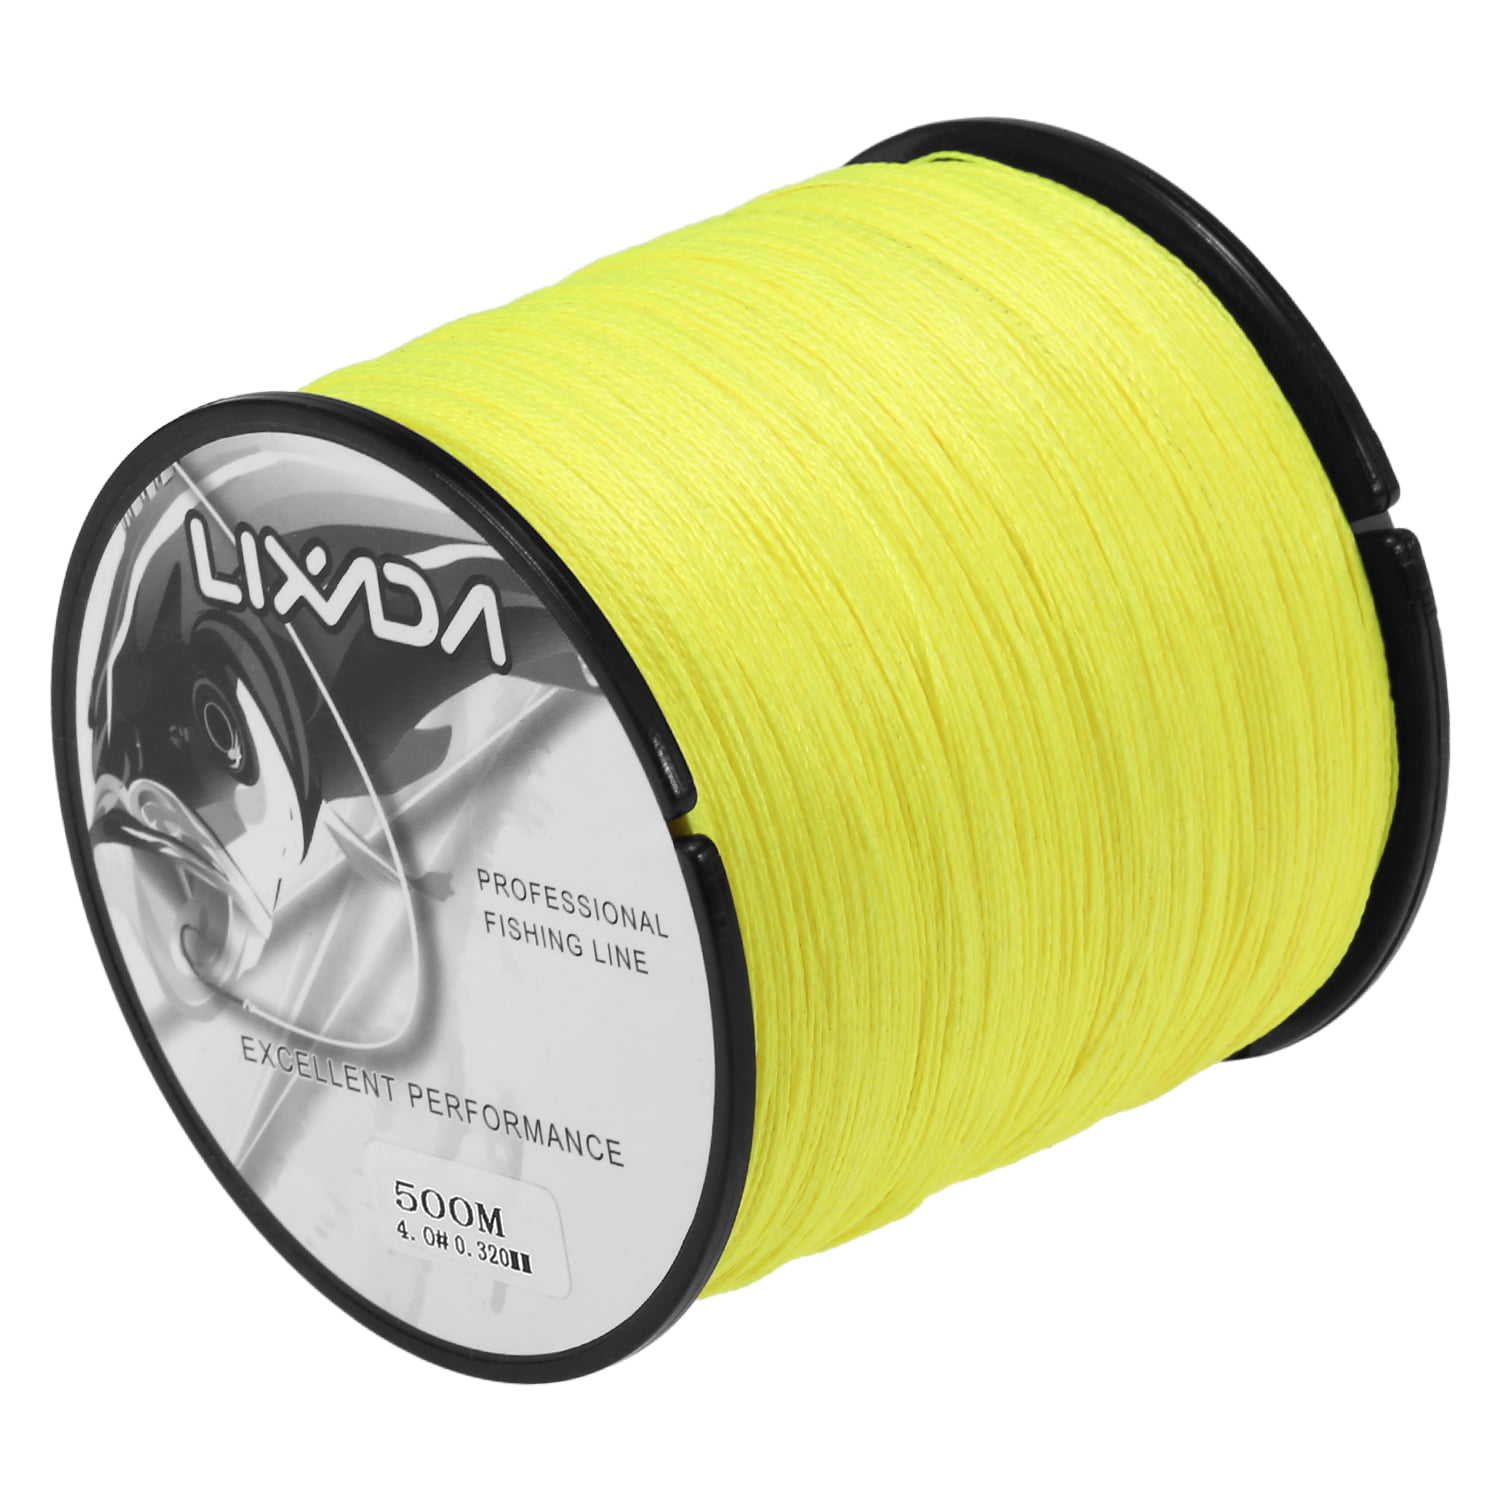 Details about   Braided Fishing Line 500m 300m 100m 8 Strands 4 Strands Multifilament Fishing